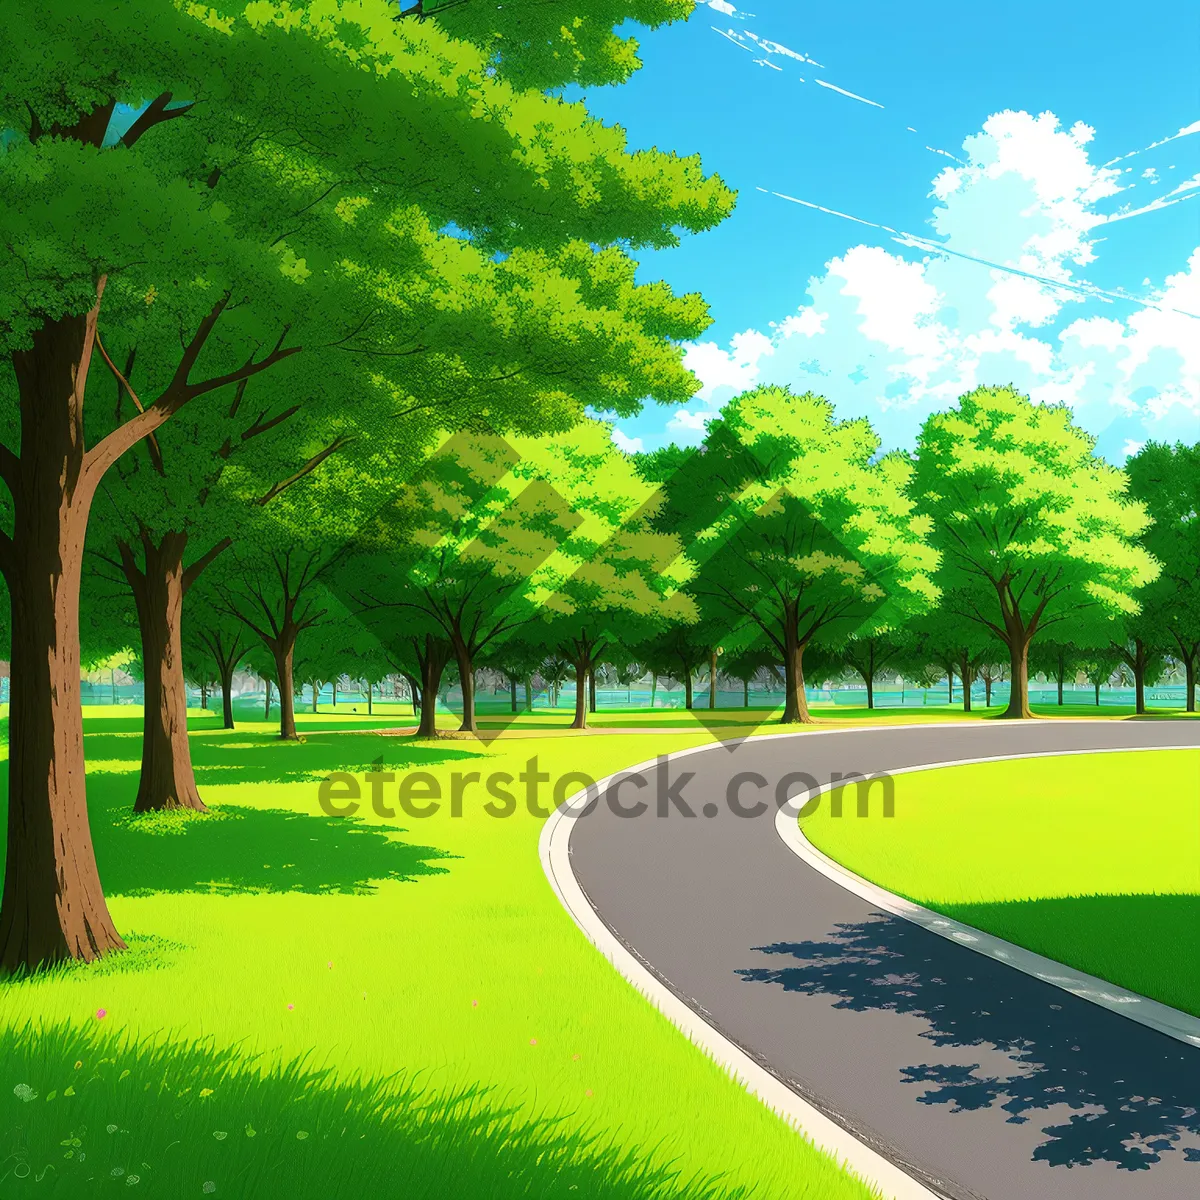 Picture of Golf Course Serene Landscape with Majestic Trees